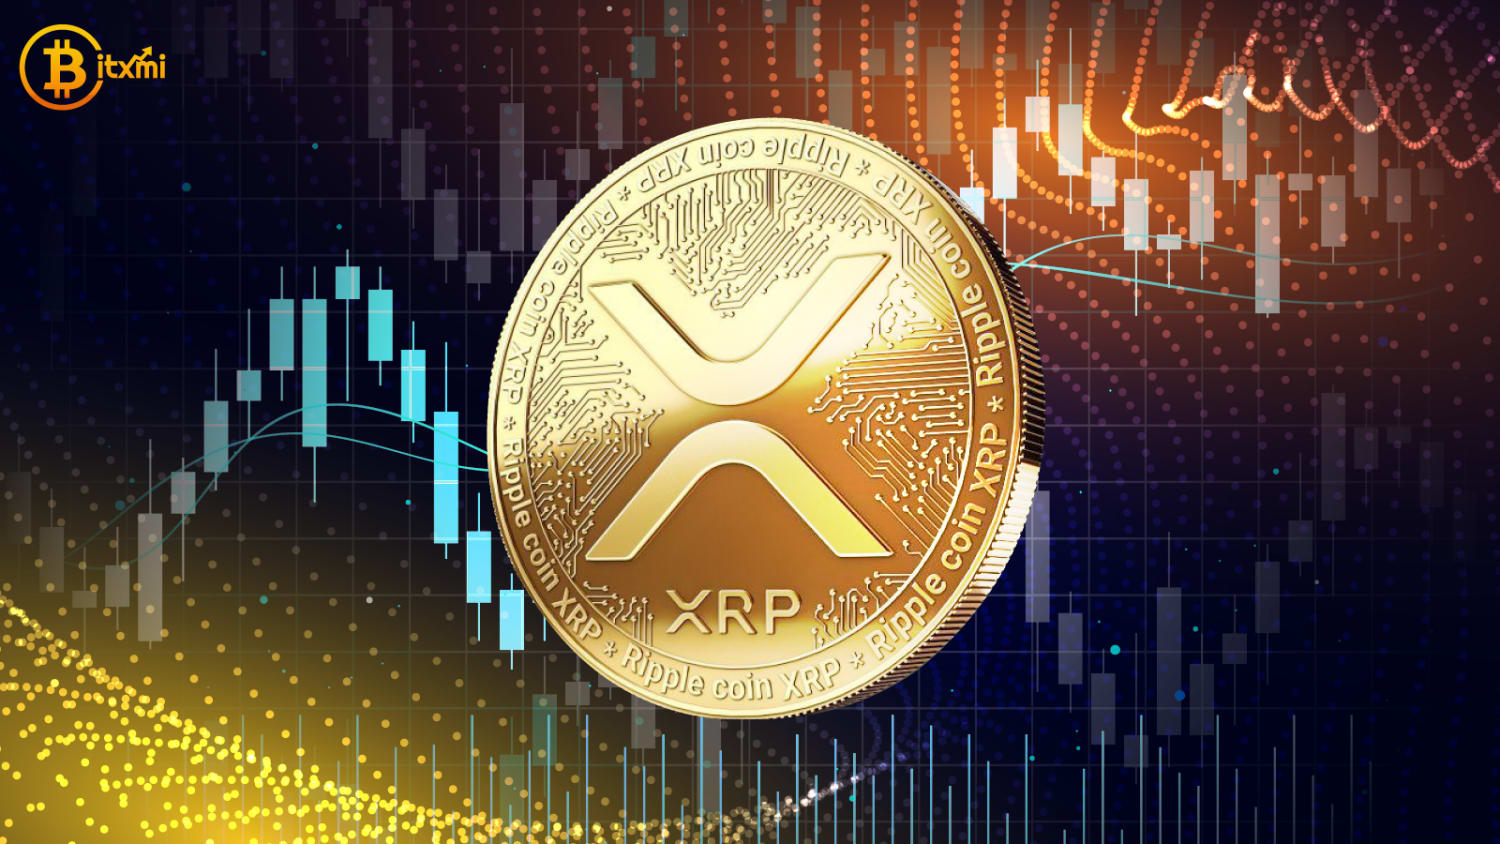 XRP (Ripple) Prepares for a Surge